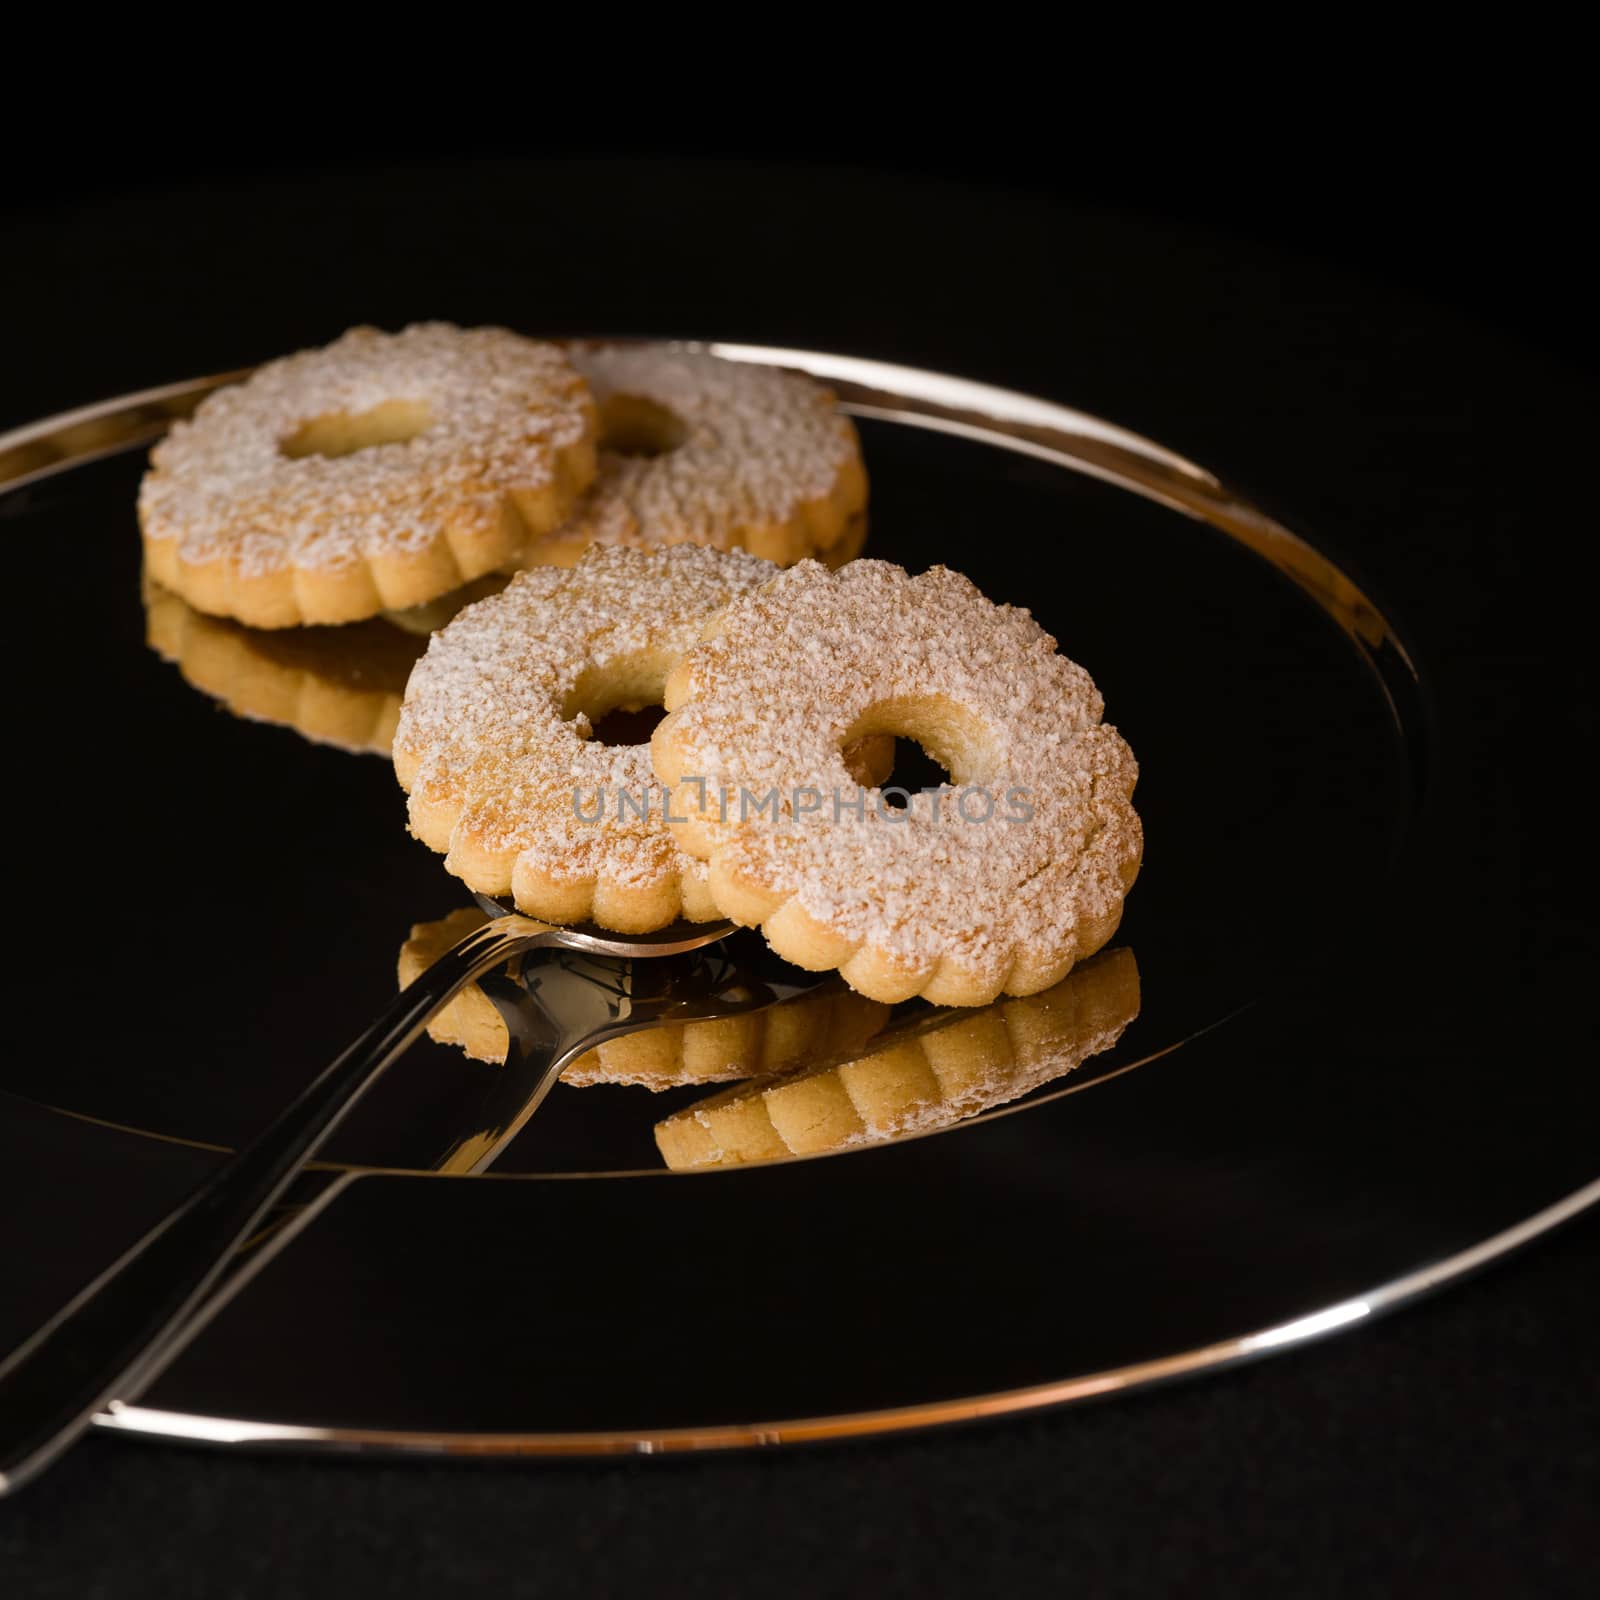 Biscuits on a plate by LuigiMorbidelli